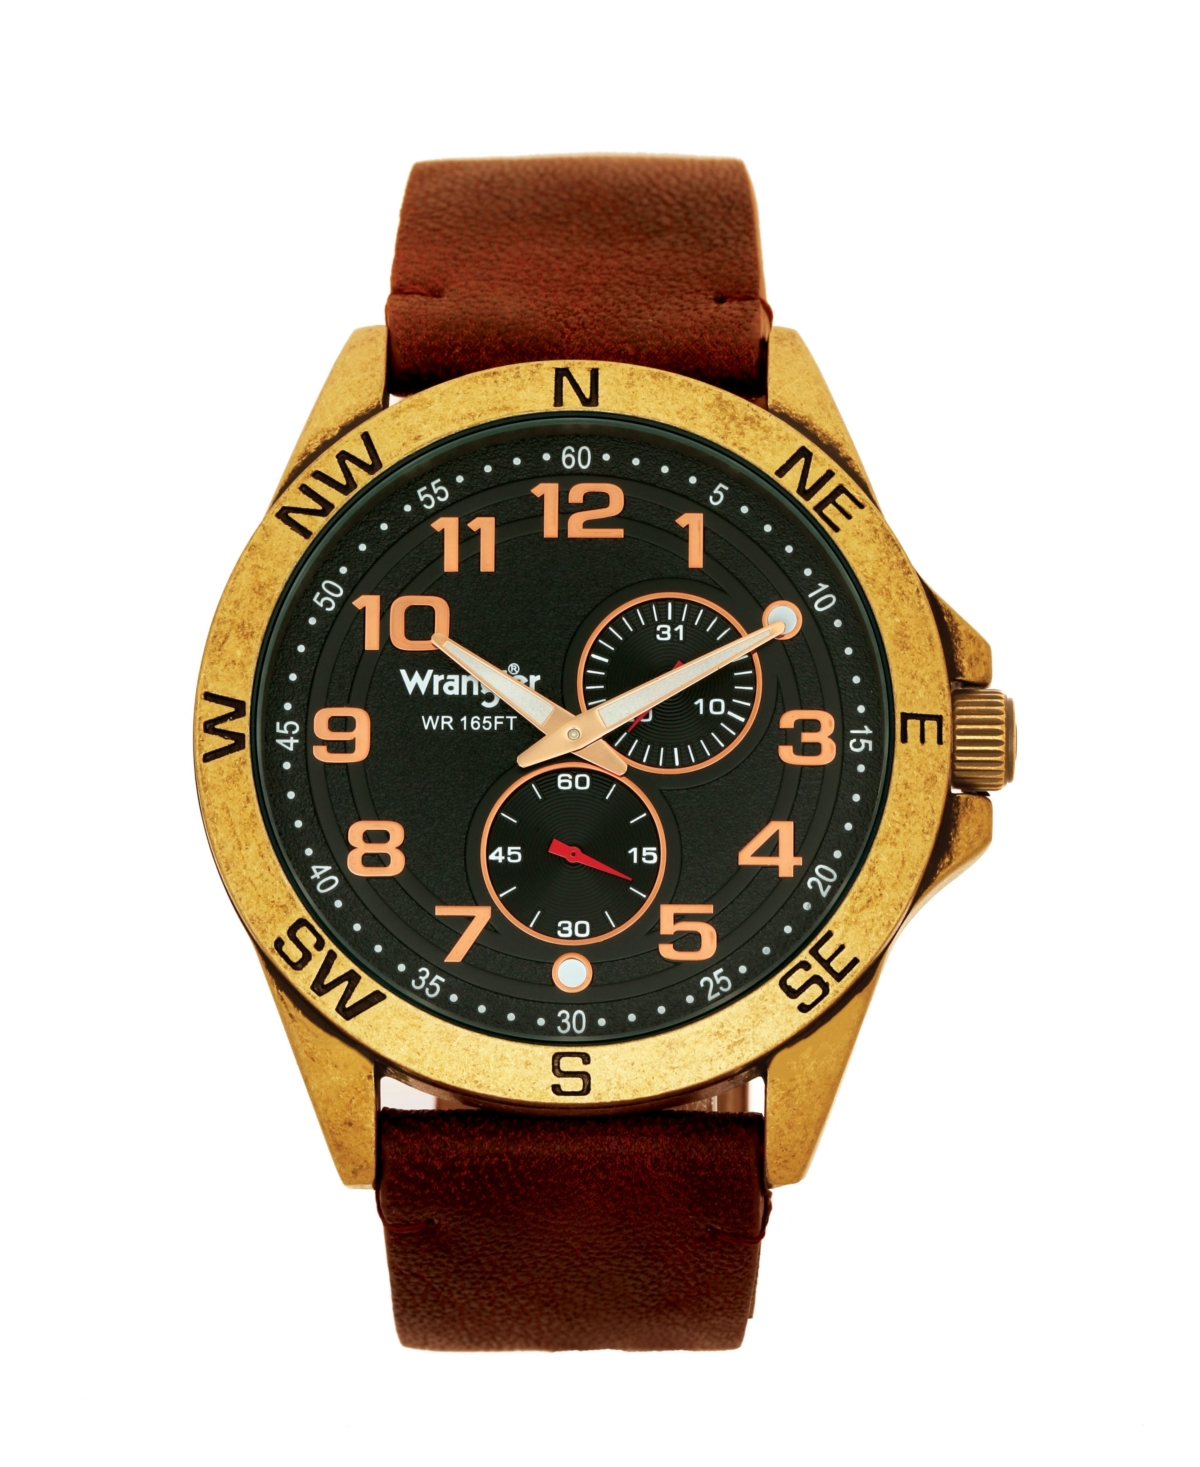 Men's Watch, 48MM Antique Brass Plated Case, Compass Directions on Bezel, Black Dial, Antiqued Arabic Numerals, Multi Function Date and Secon